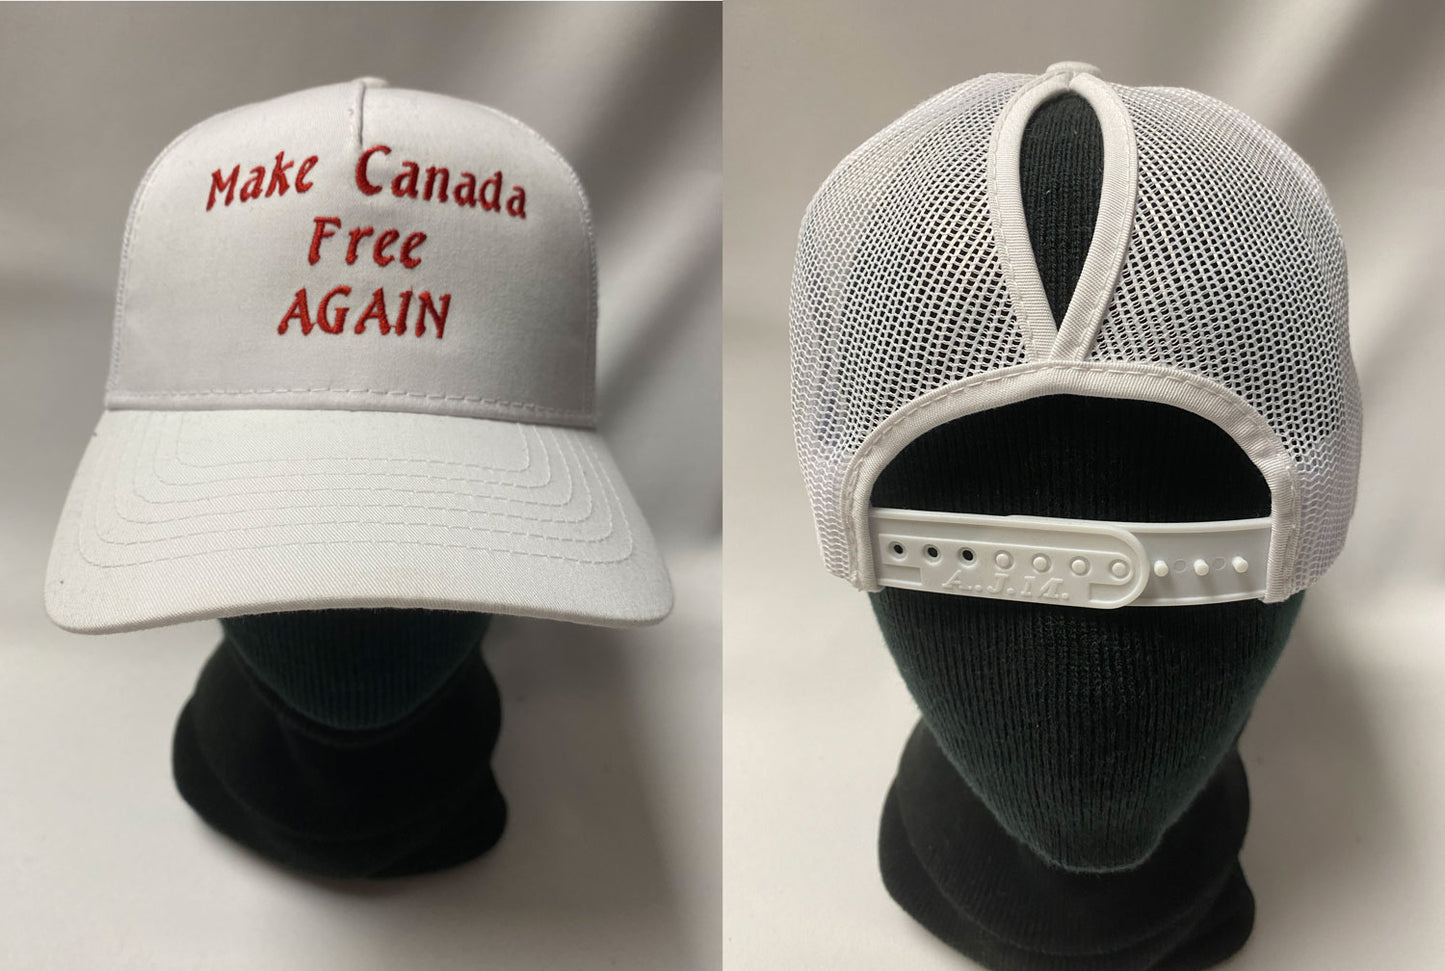 PONYTAIL BALL CAP "MAKE CANADA FREE AGAIN" 2022 - red embroidery on white